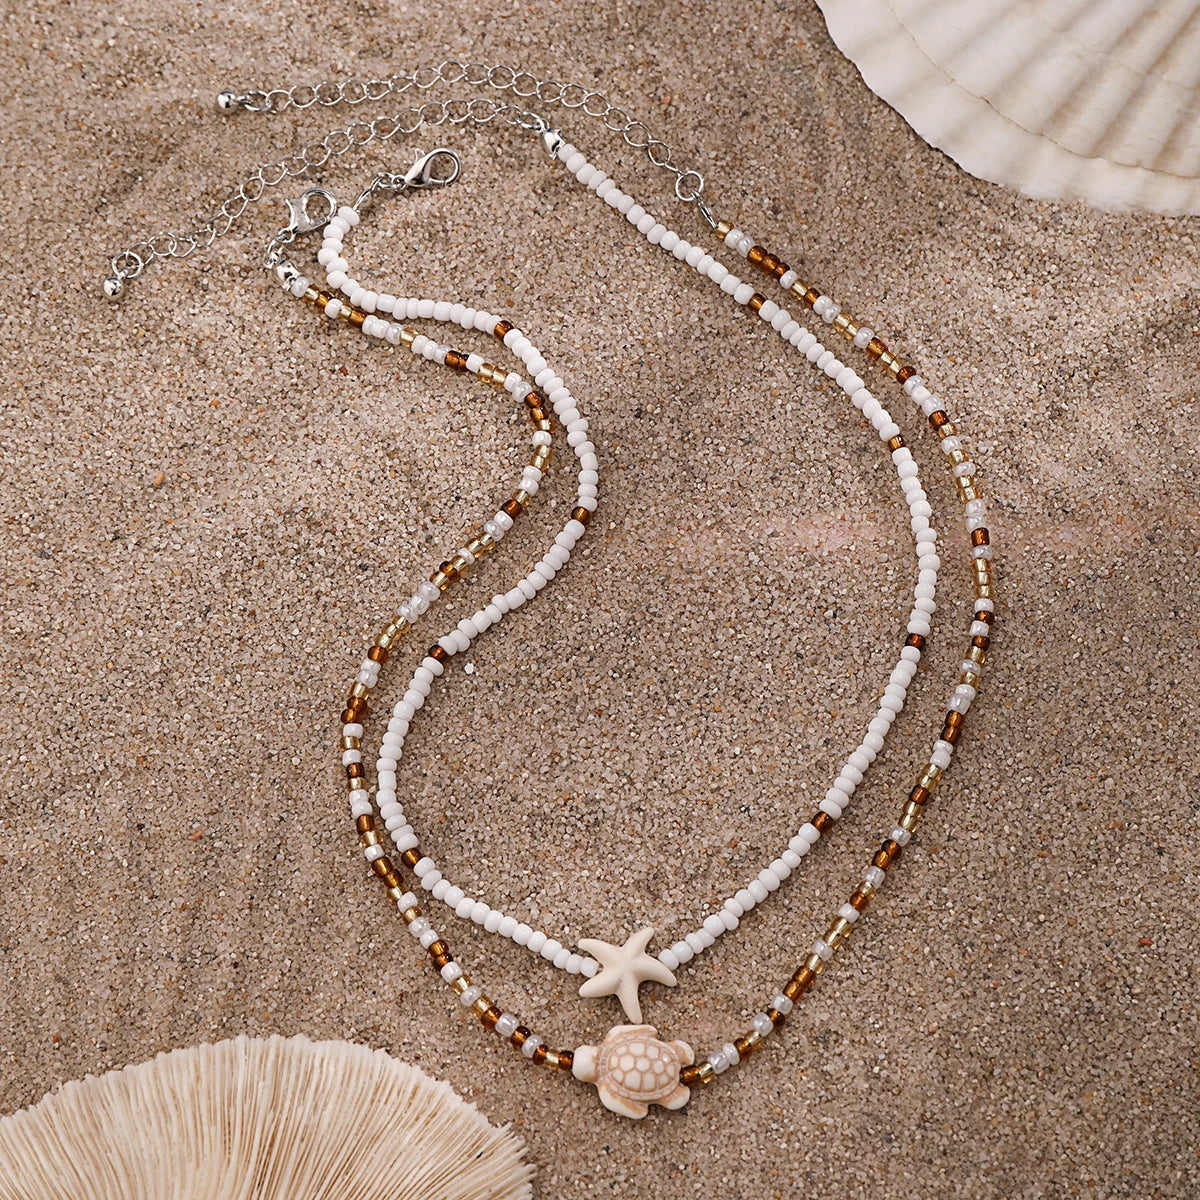 Two TORTUESTAR shell necklaces